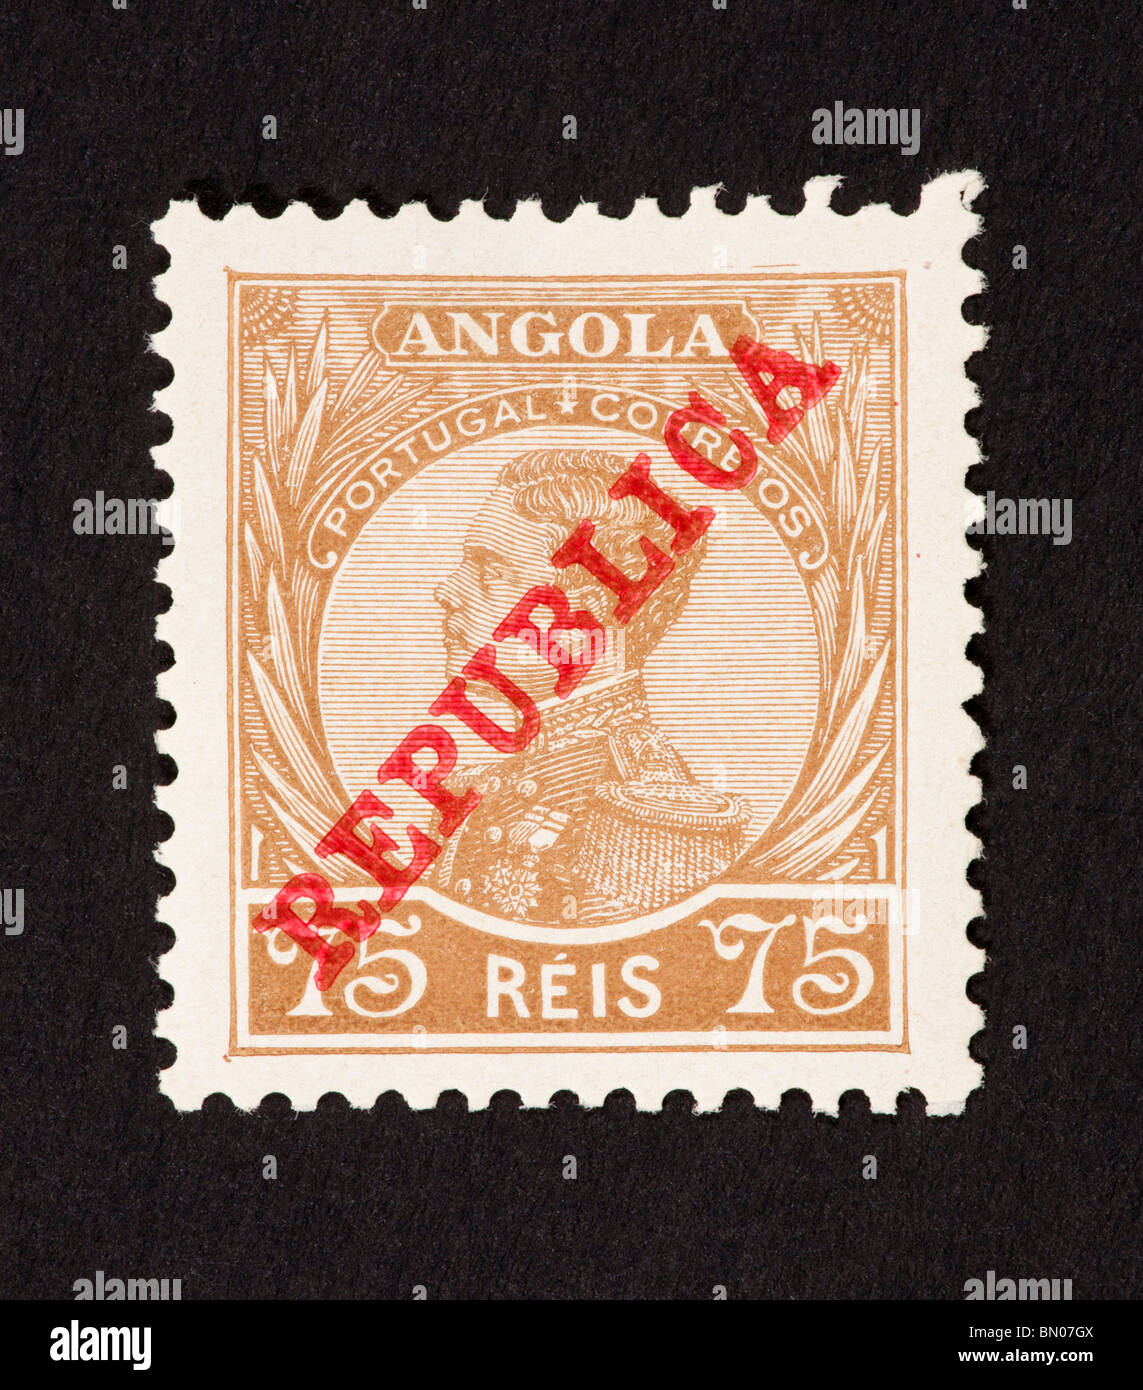 Postage stamp from Angola depicting King Manuel II of Portugal. Stock Photo